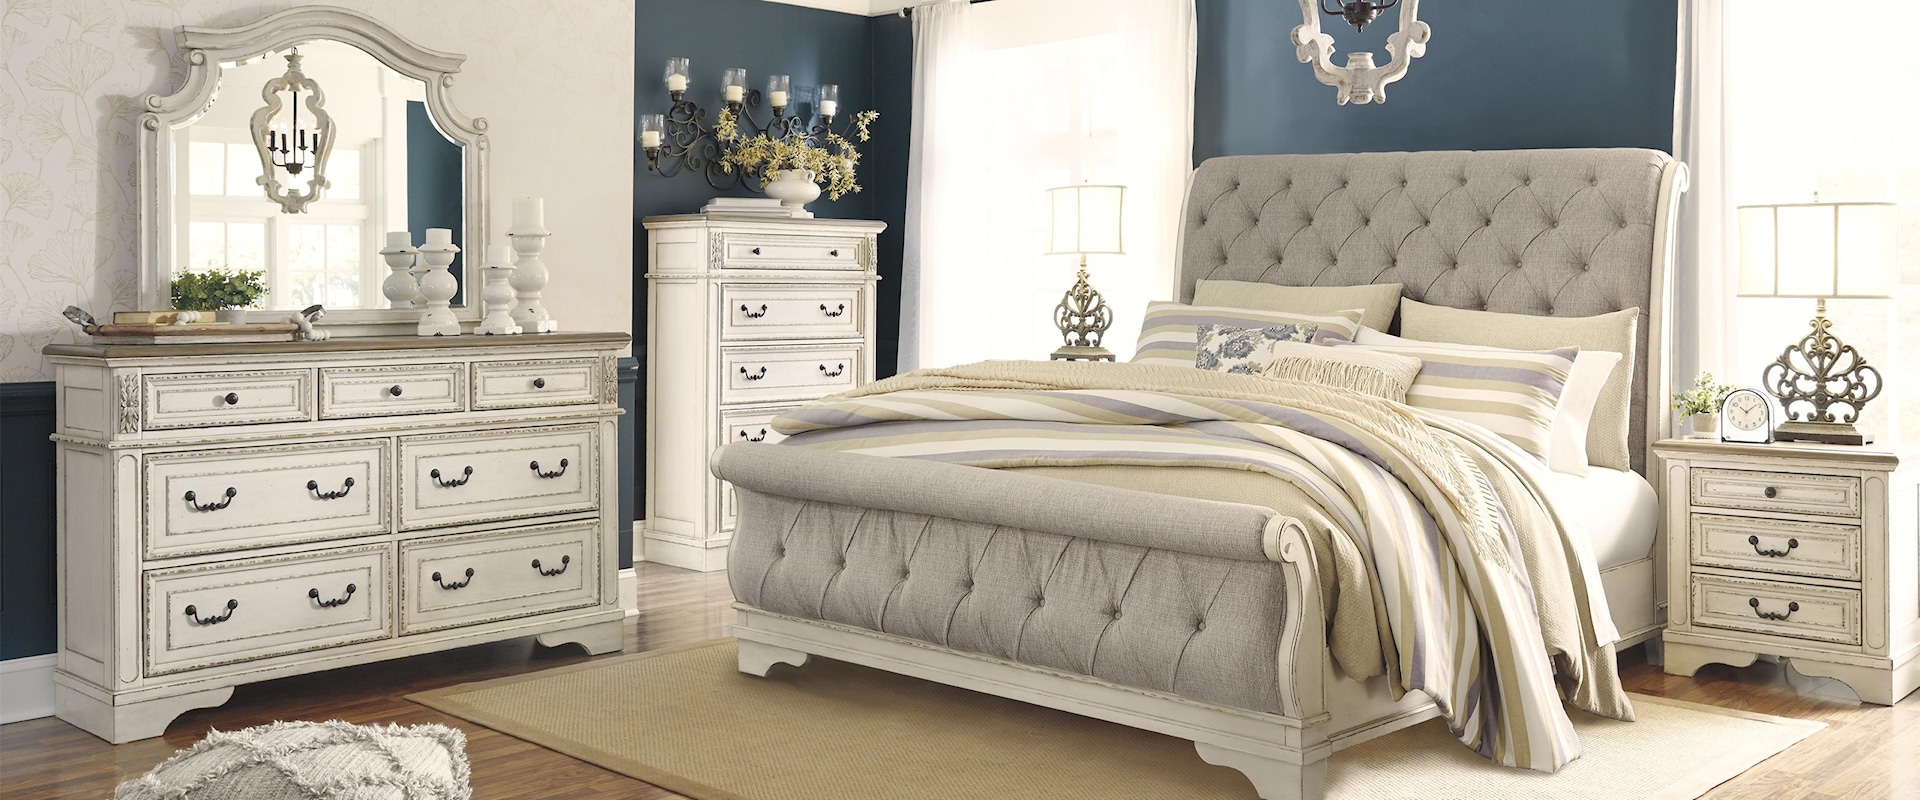 Queen Upholstered Sleigh Bed, Dresser, Mirror and Nightstand Package